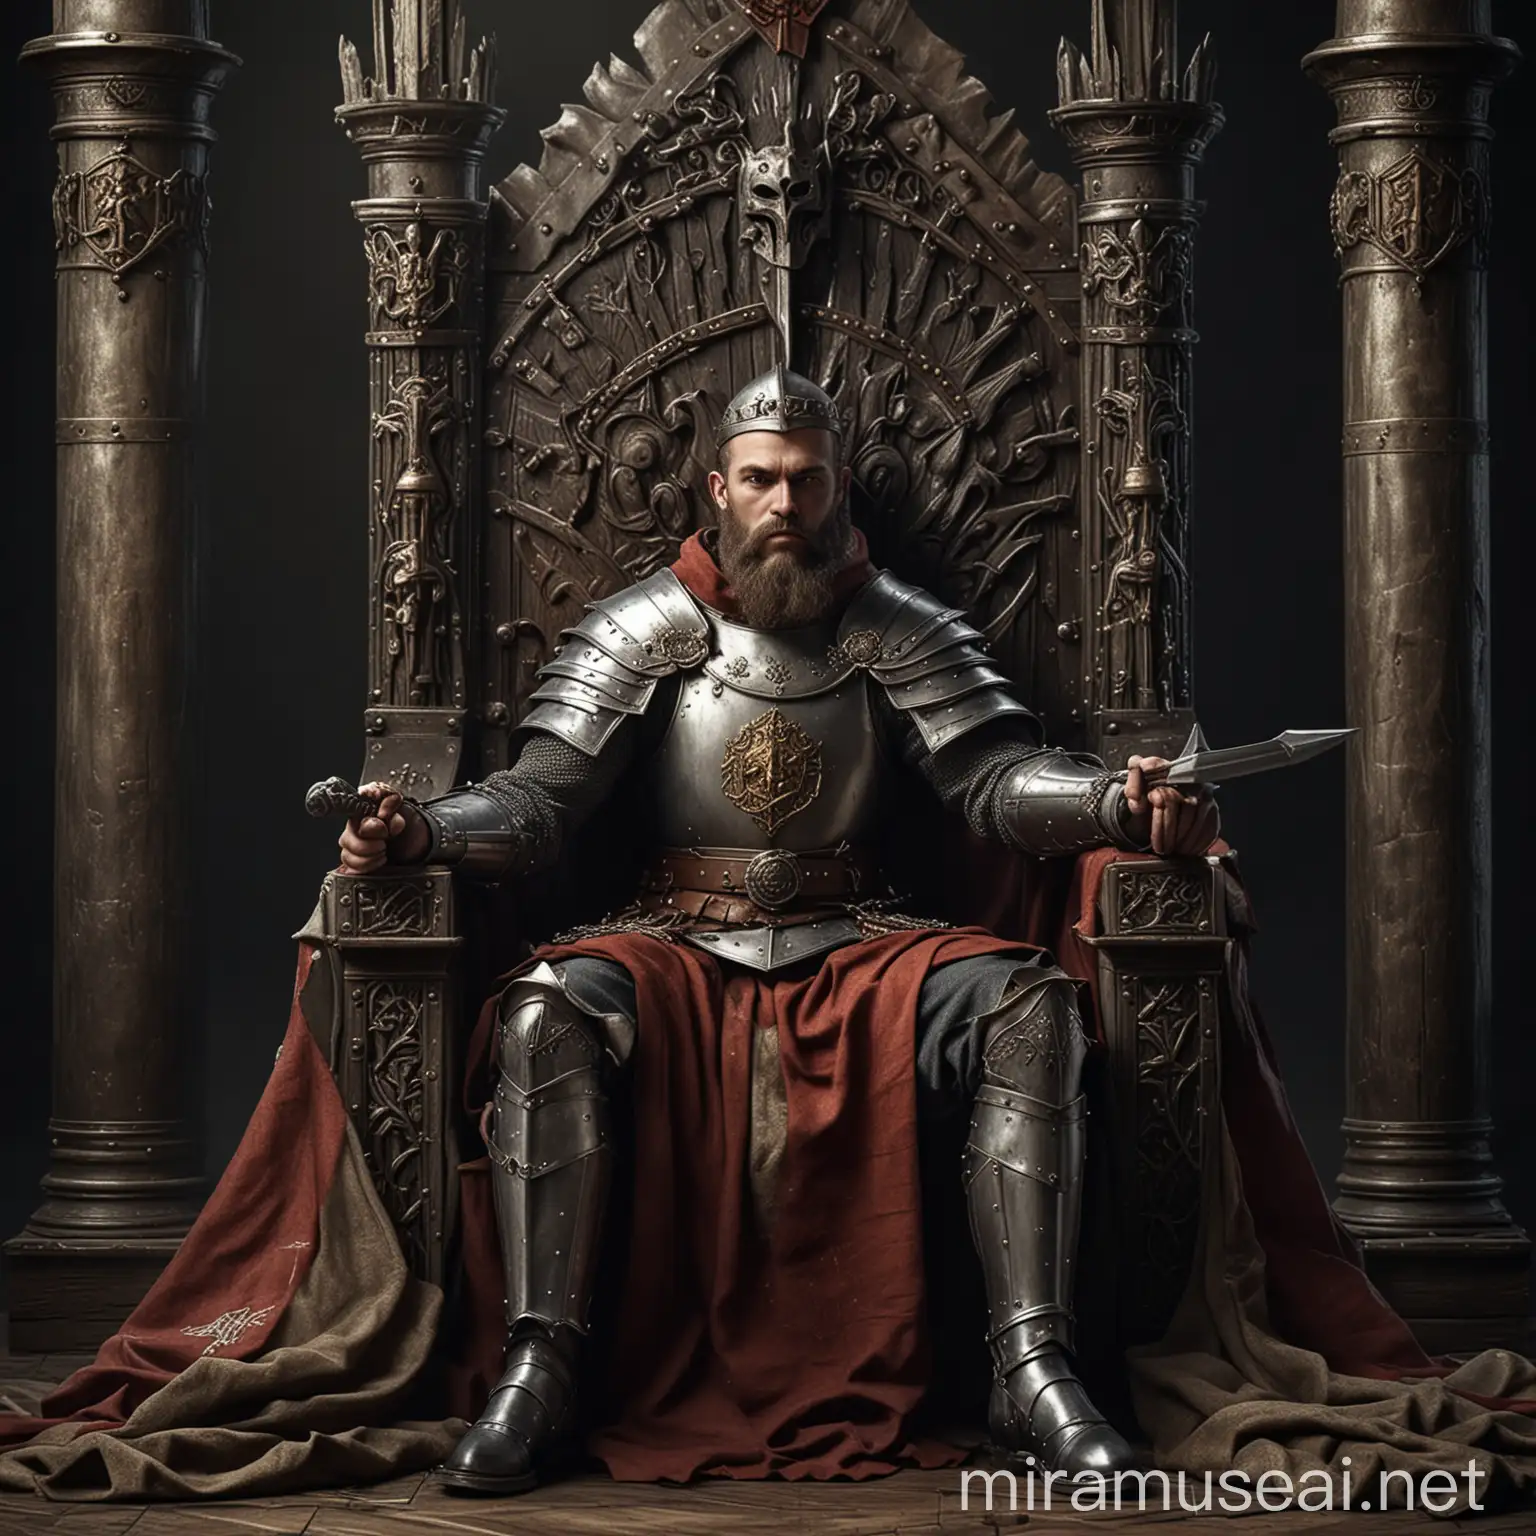 Dominant Knight Seated on Ornate Throne Realistic 4K Medieval Portrait